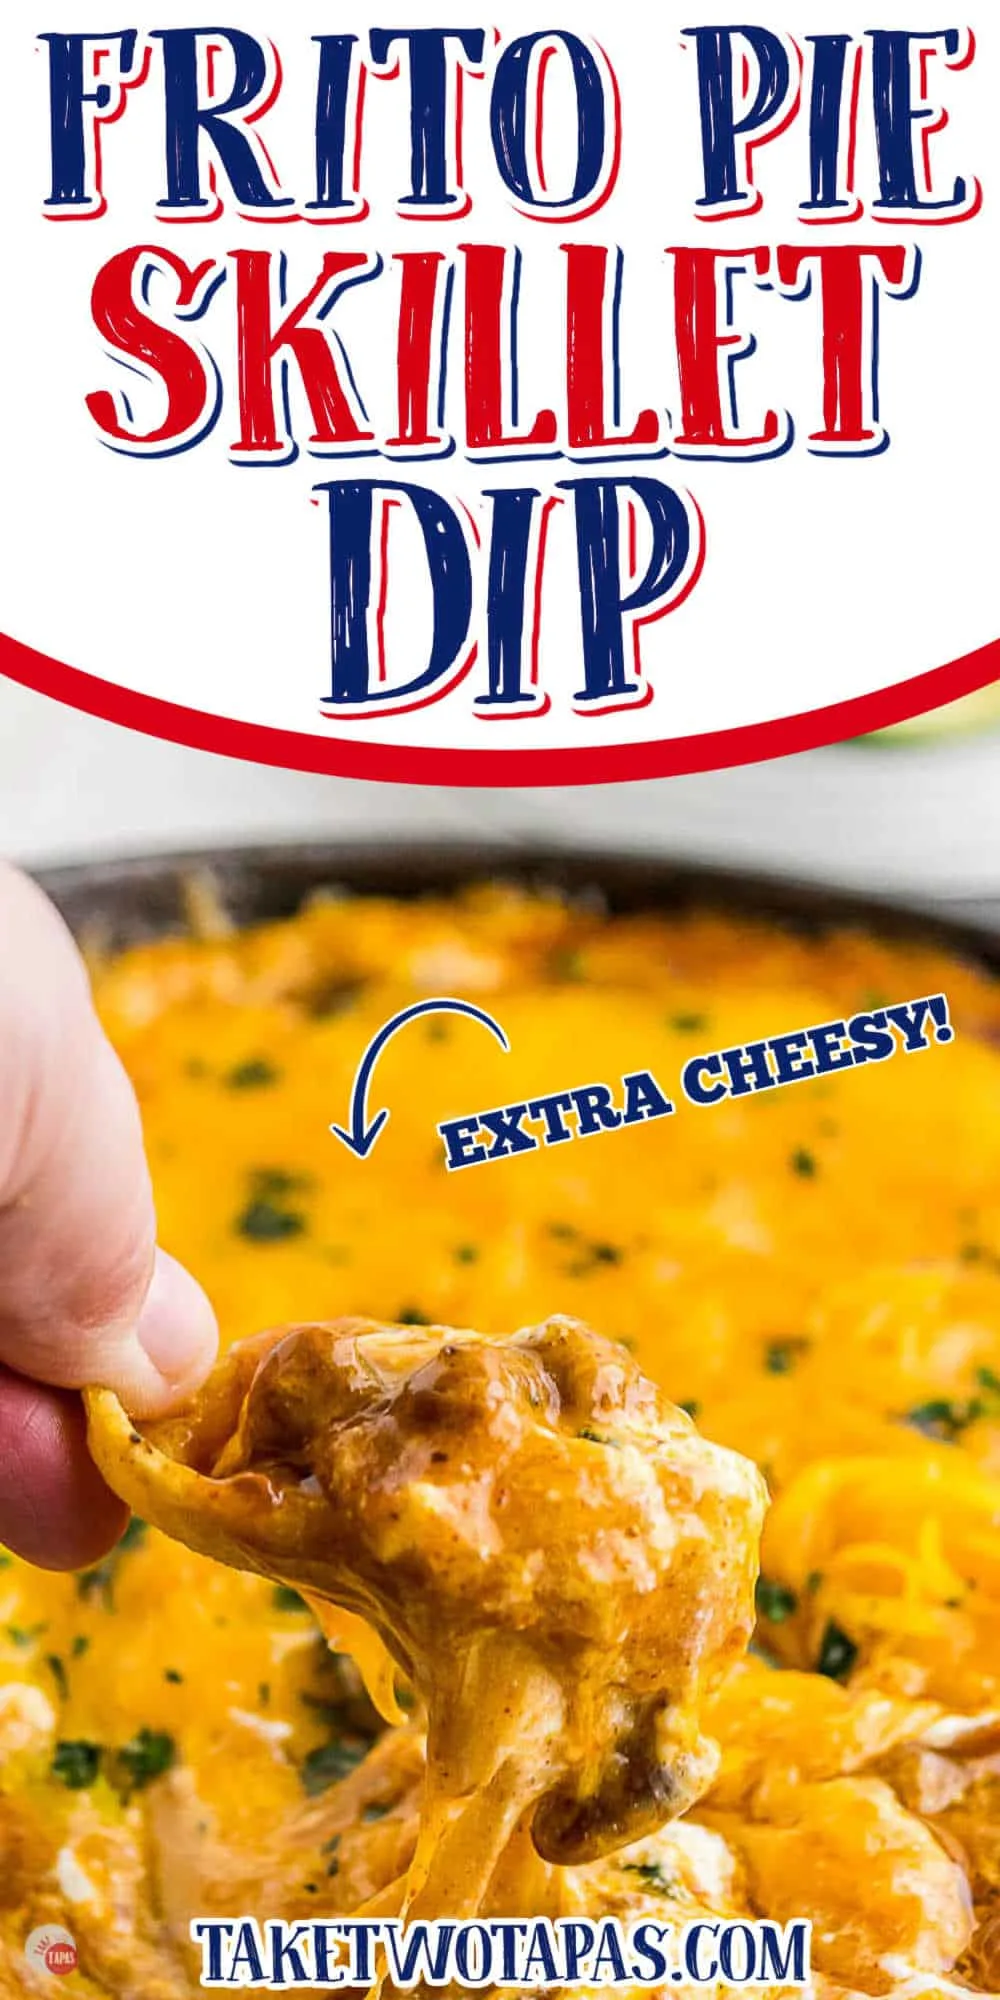 collage of cream cheese dip with text "frito pie skillet dip"